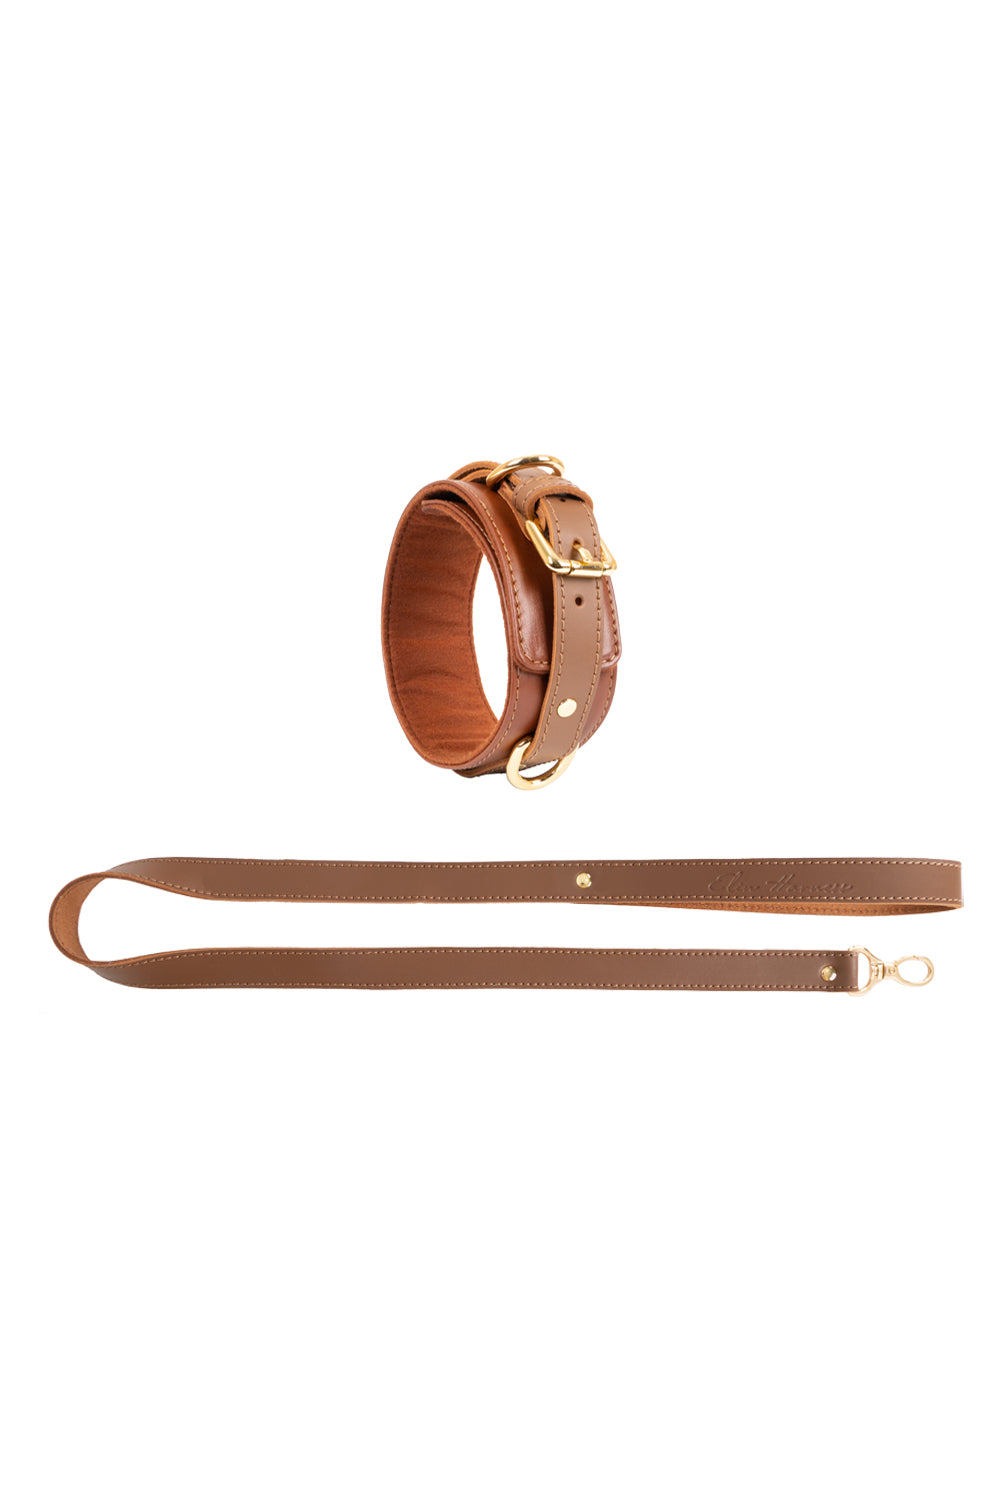 Leather Choker with Leash. 10 colors